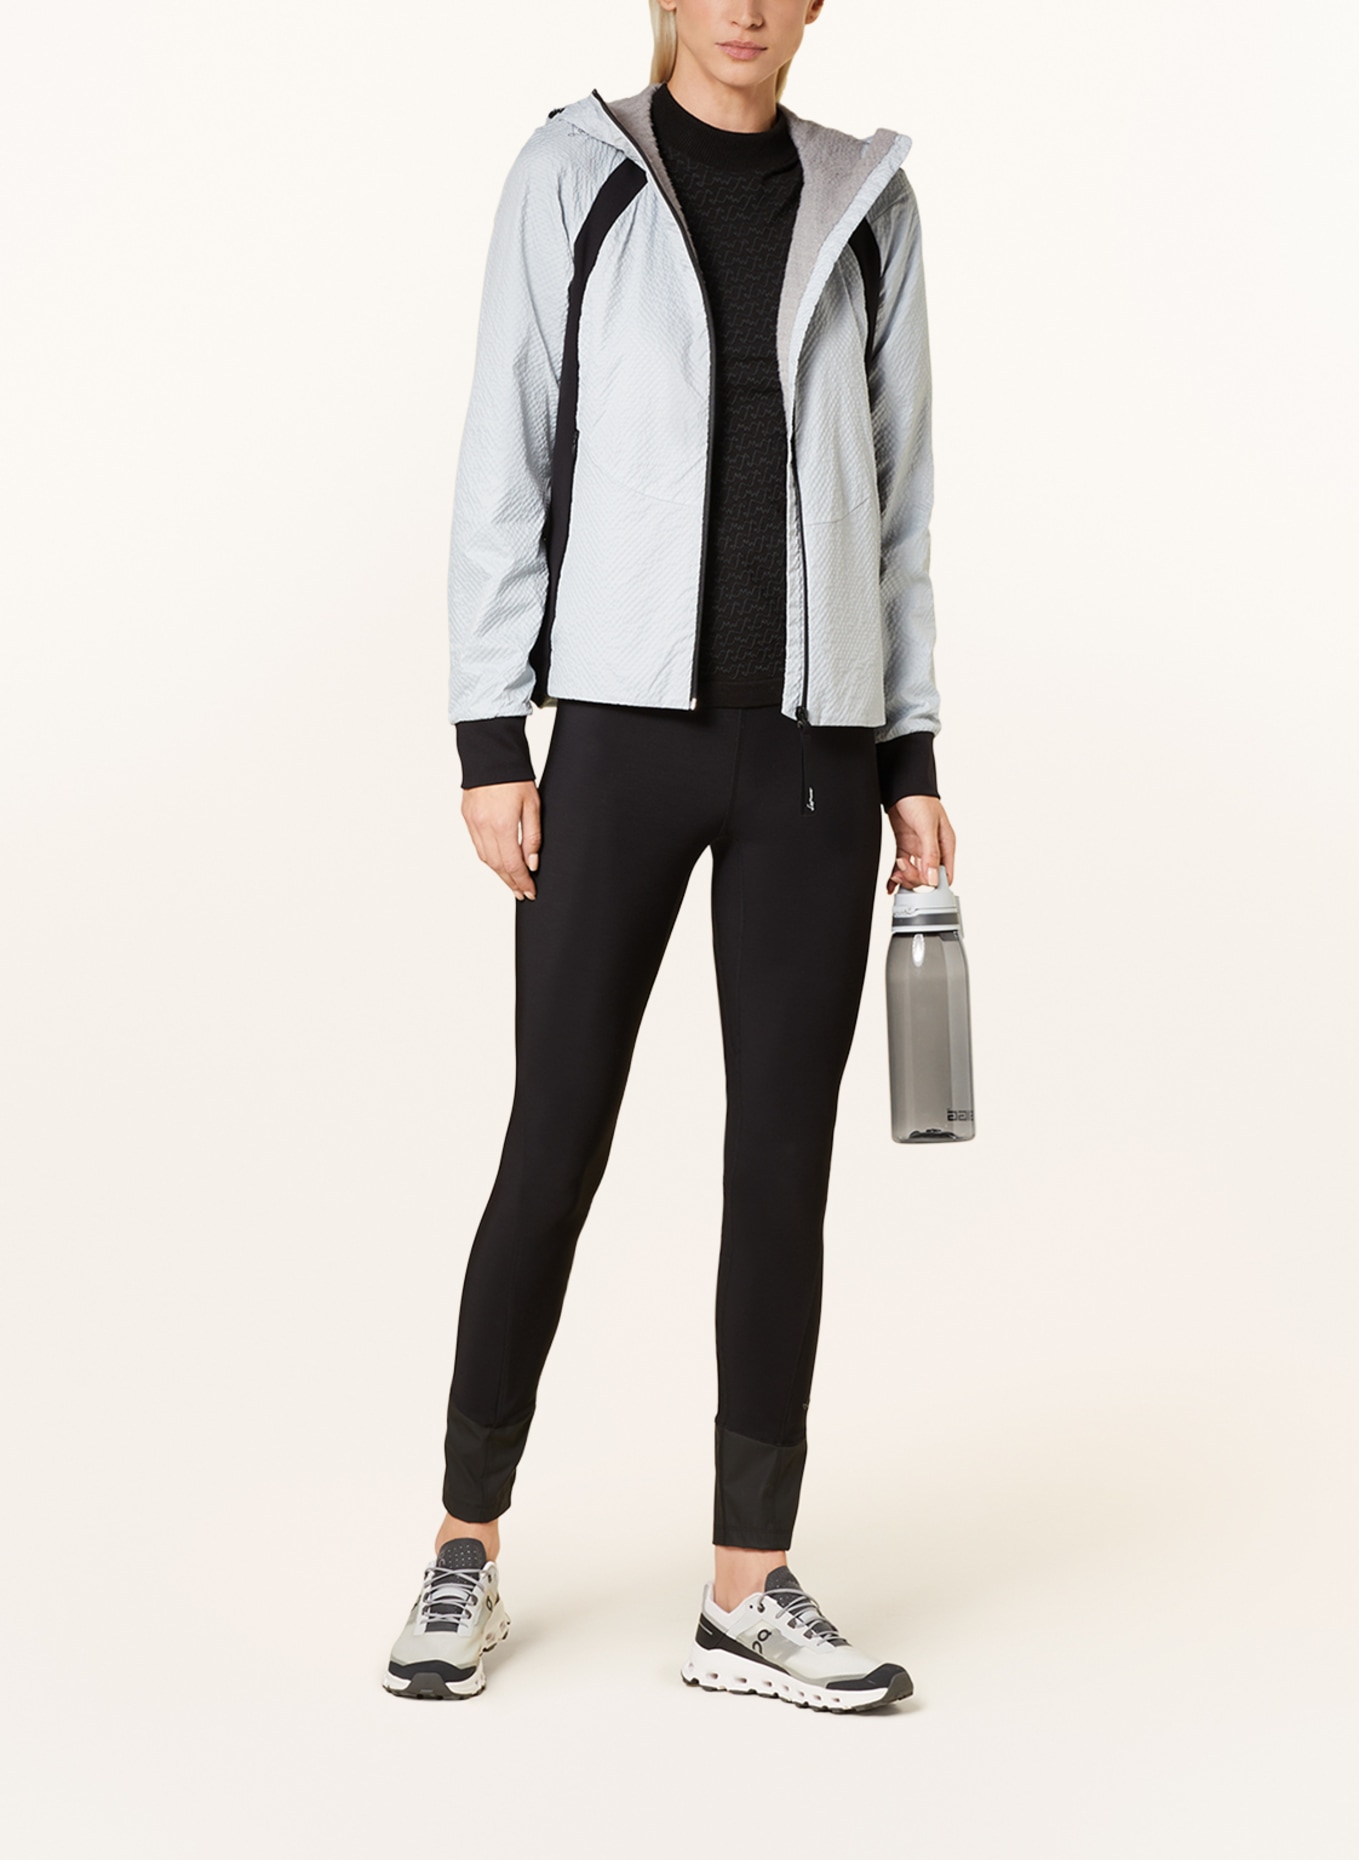 LaMunt Mid-layer jacket ALESSIA, Color: LIGHT GRAY (Image 2)